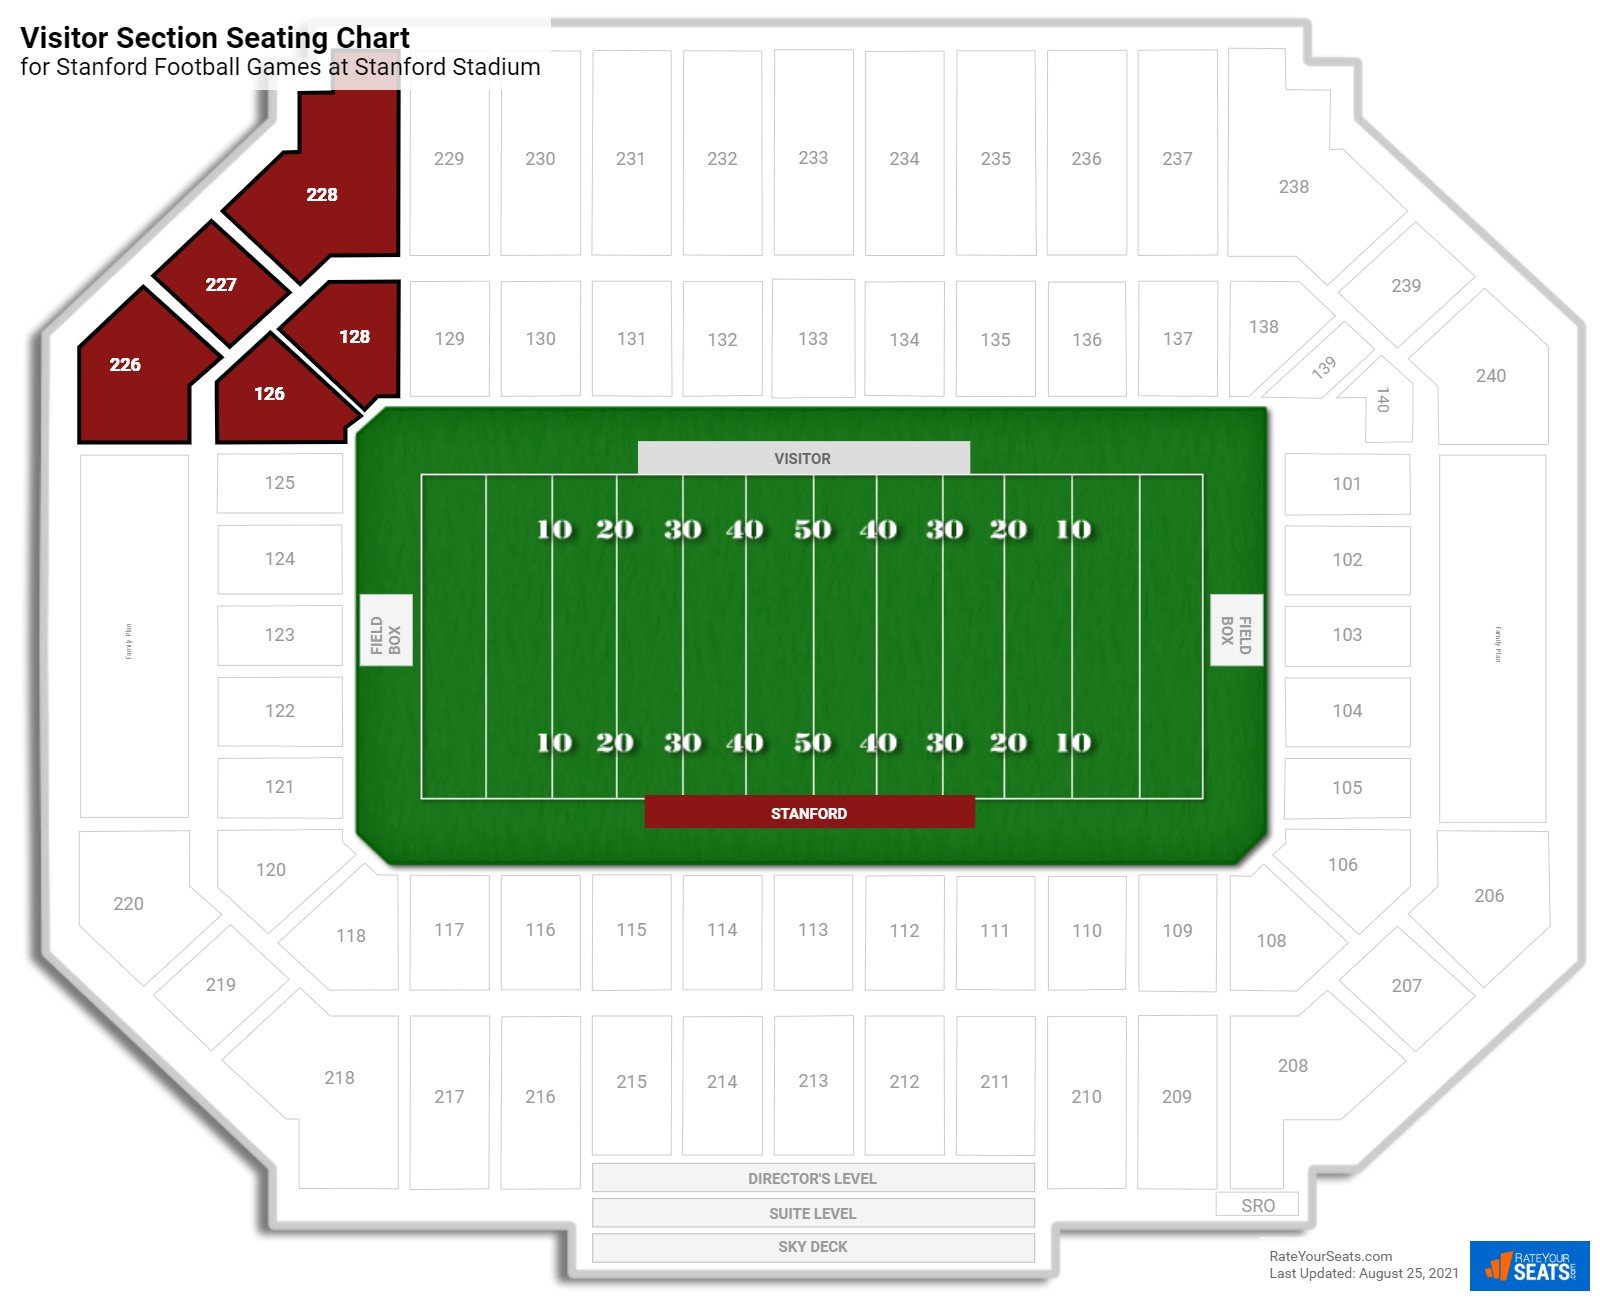 Stanford Visitor Section Seating Chart at Stanford Stadium